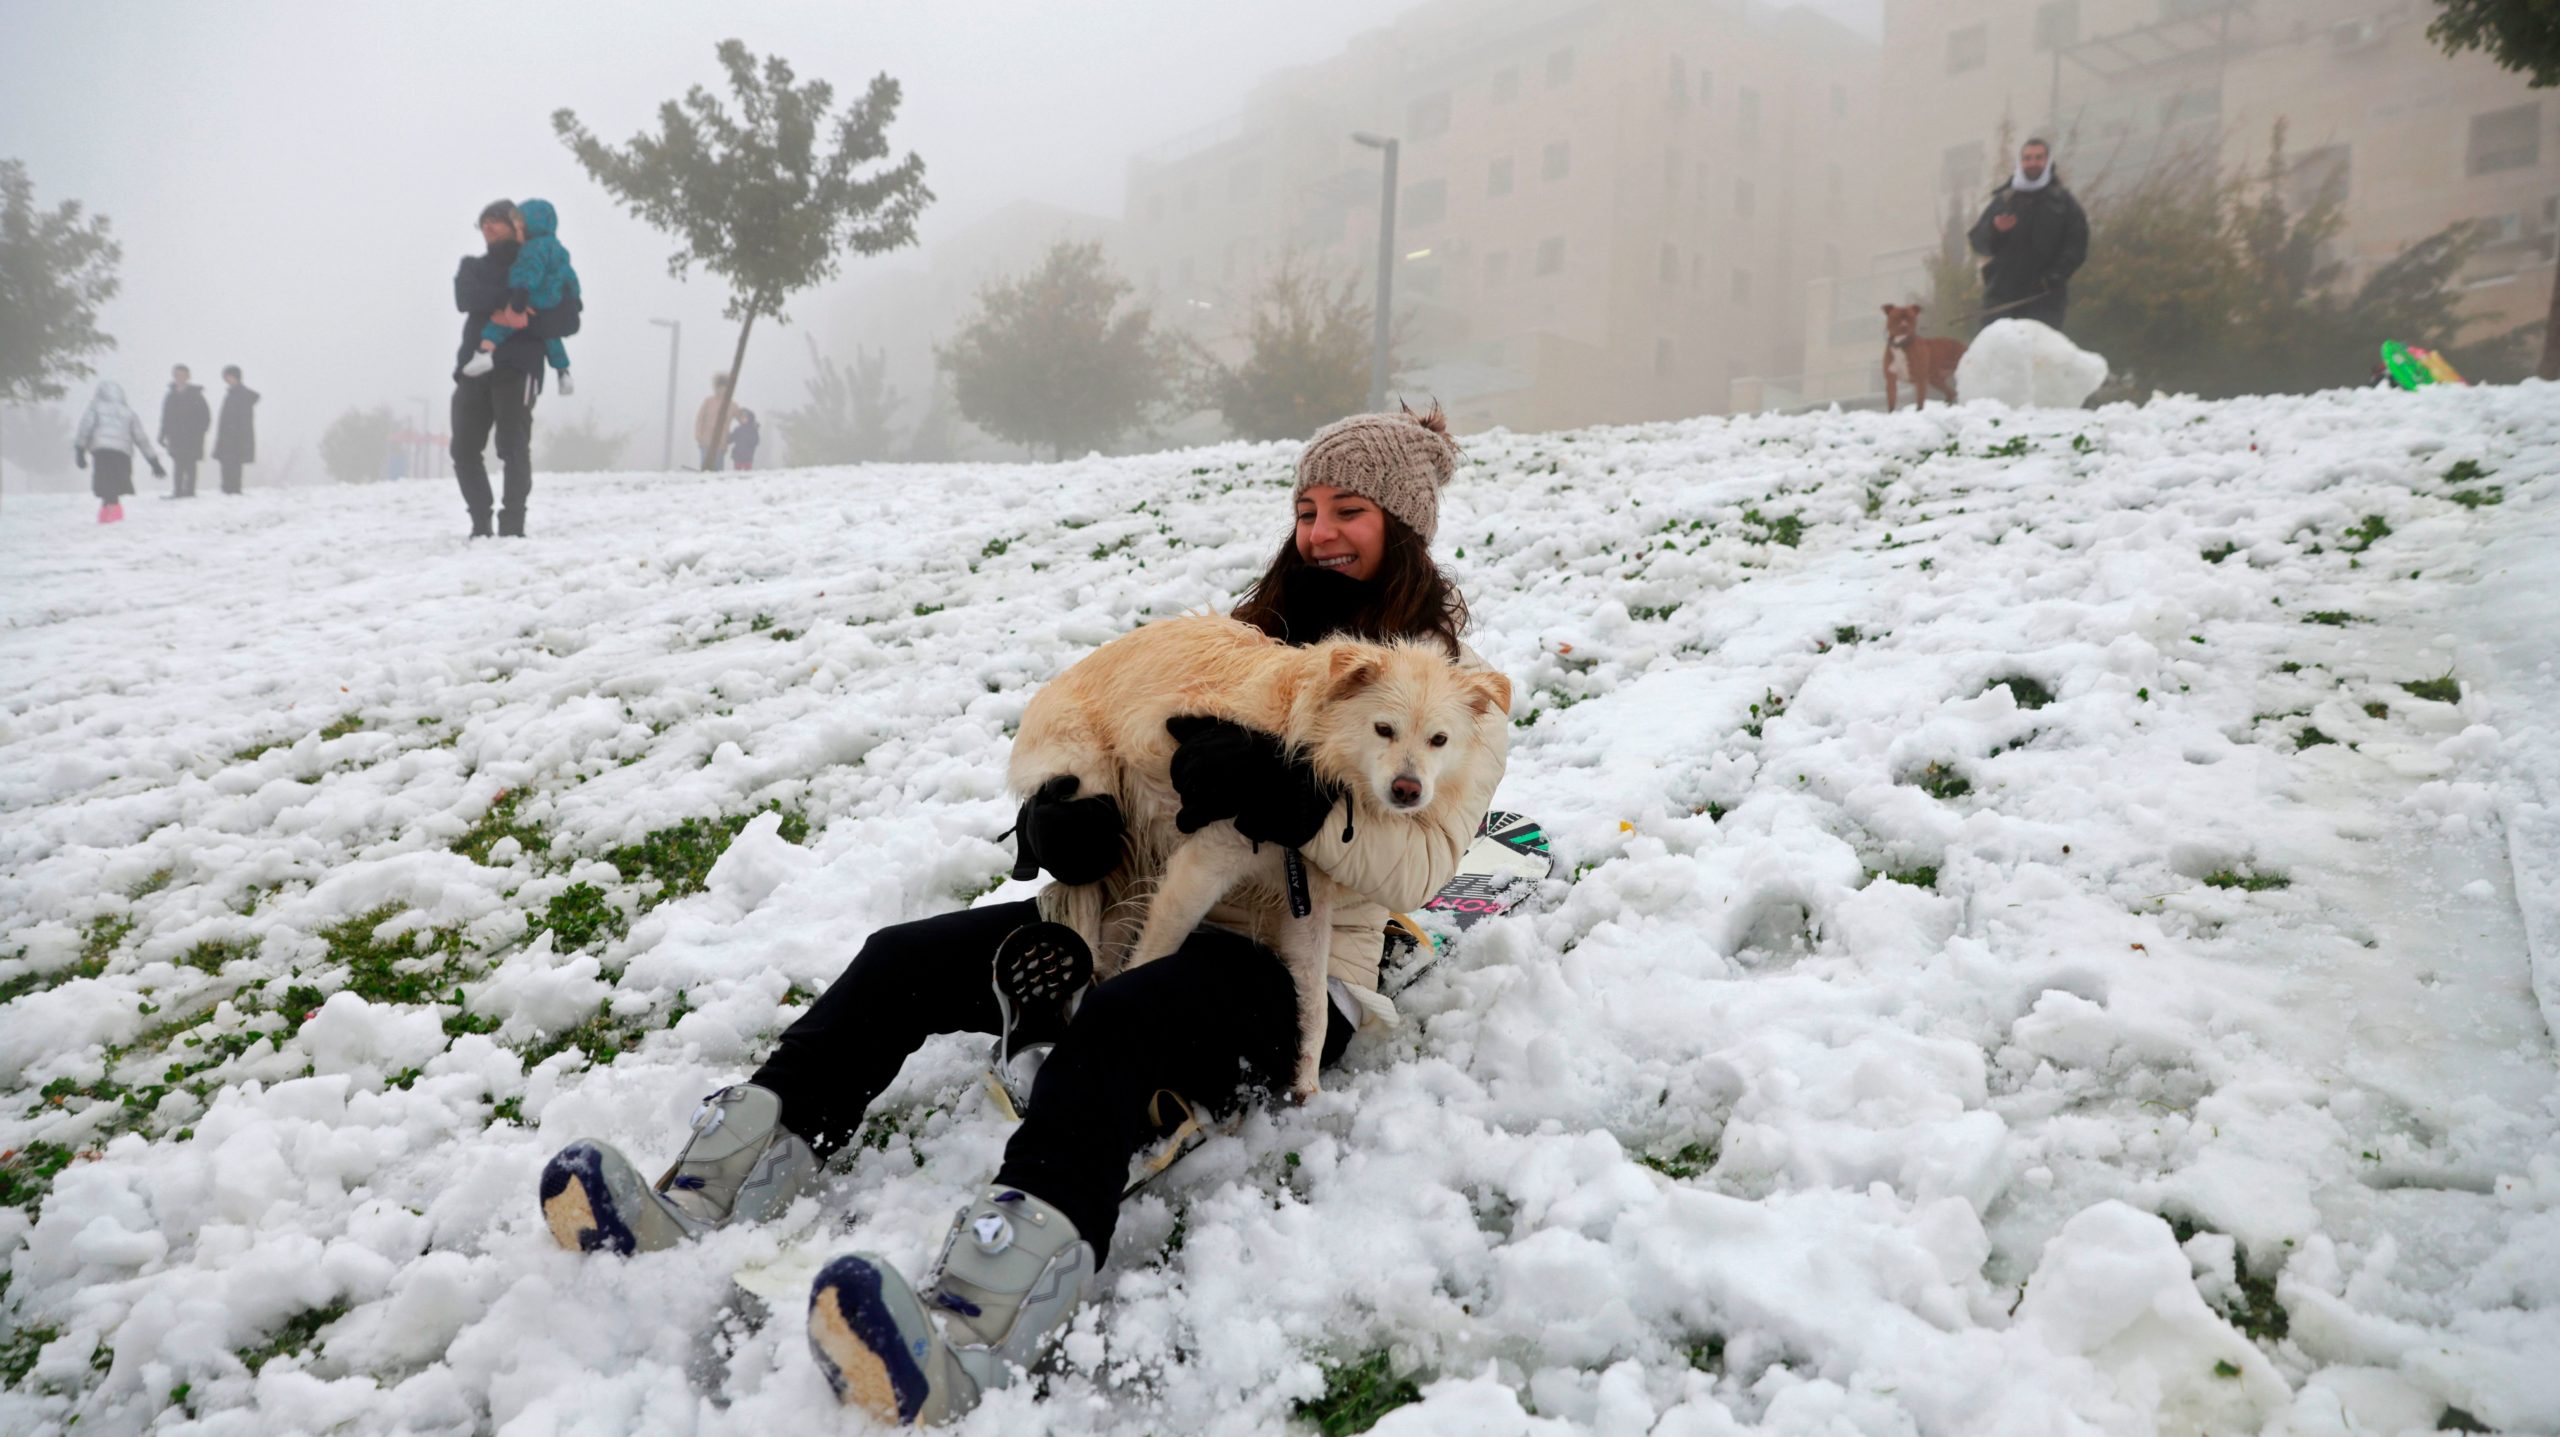 A woman holding a dog slides down a snow-covered slope following a snowstorm in Jerusalem, on Feb. 18, 2021. (Photo: MENAHEM KAHANA, Getty Images)